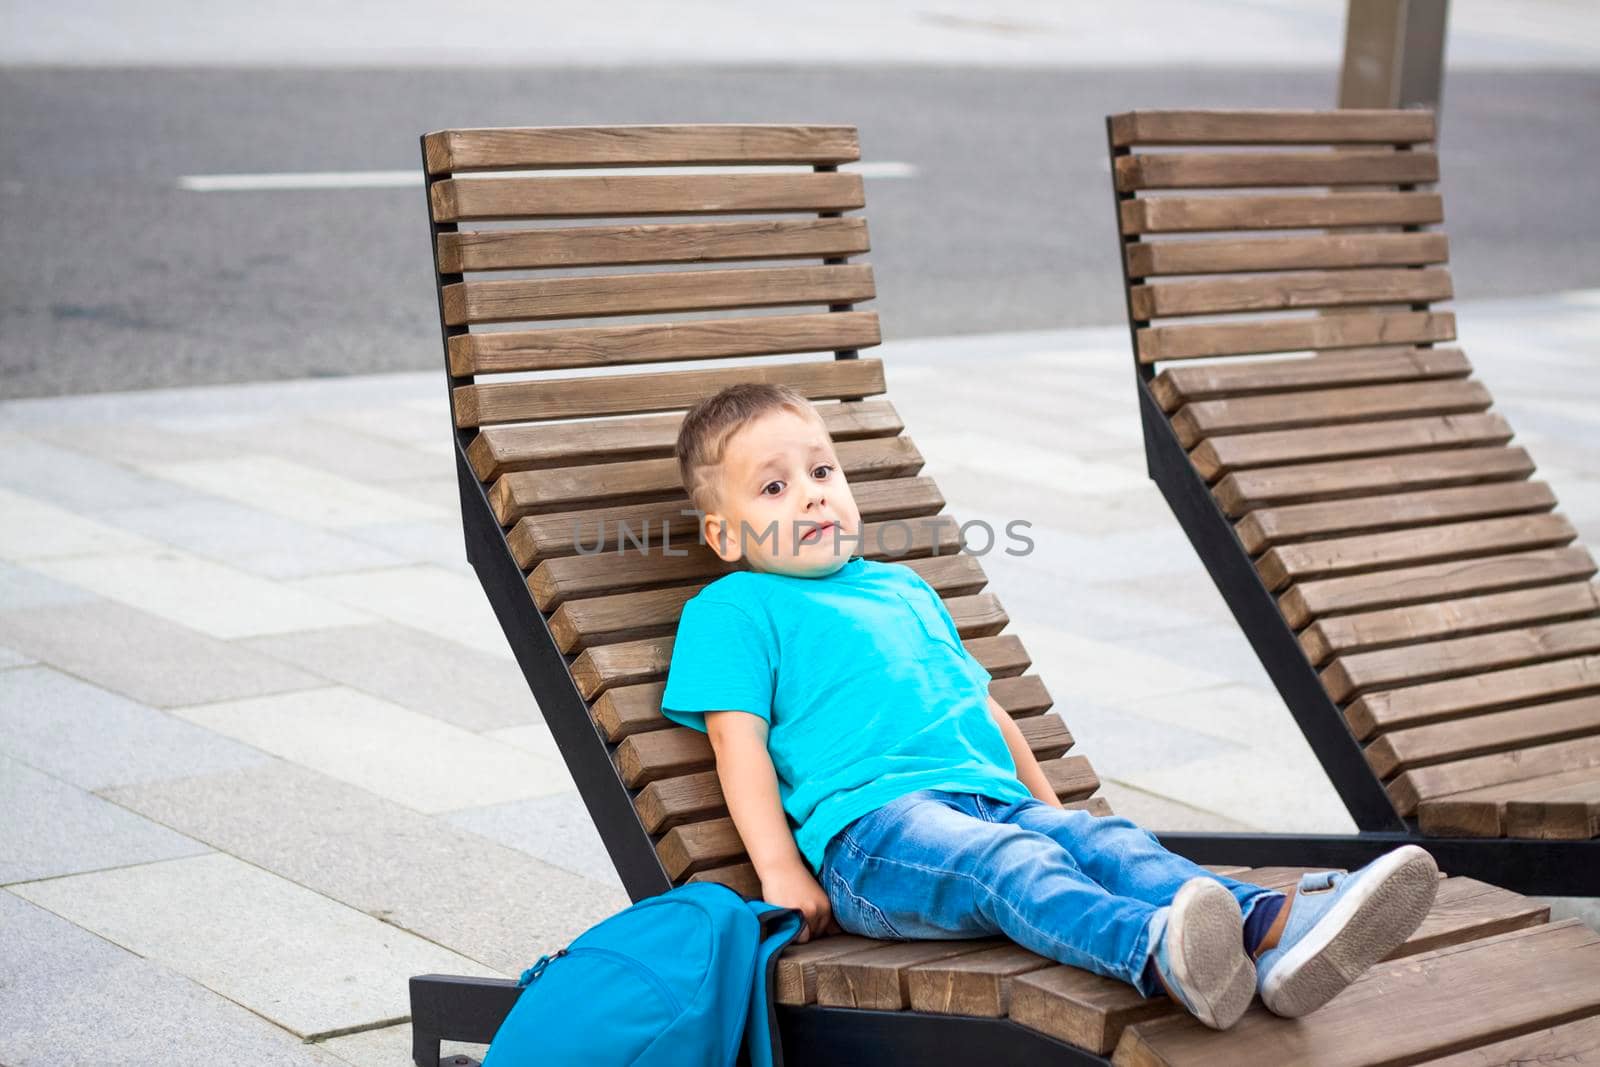 A boy in a blue T-shirt is resting on a chaise longue that stands on the embankment. Journey.  The face expresses natural joyful emotions. Not staged photos from nature.